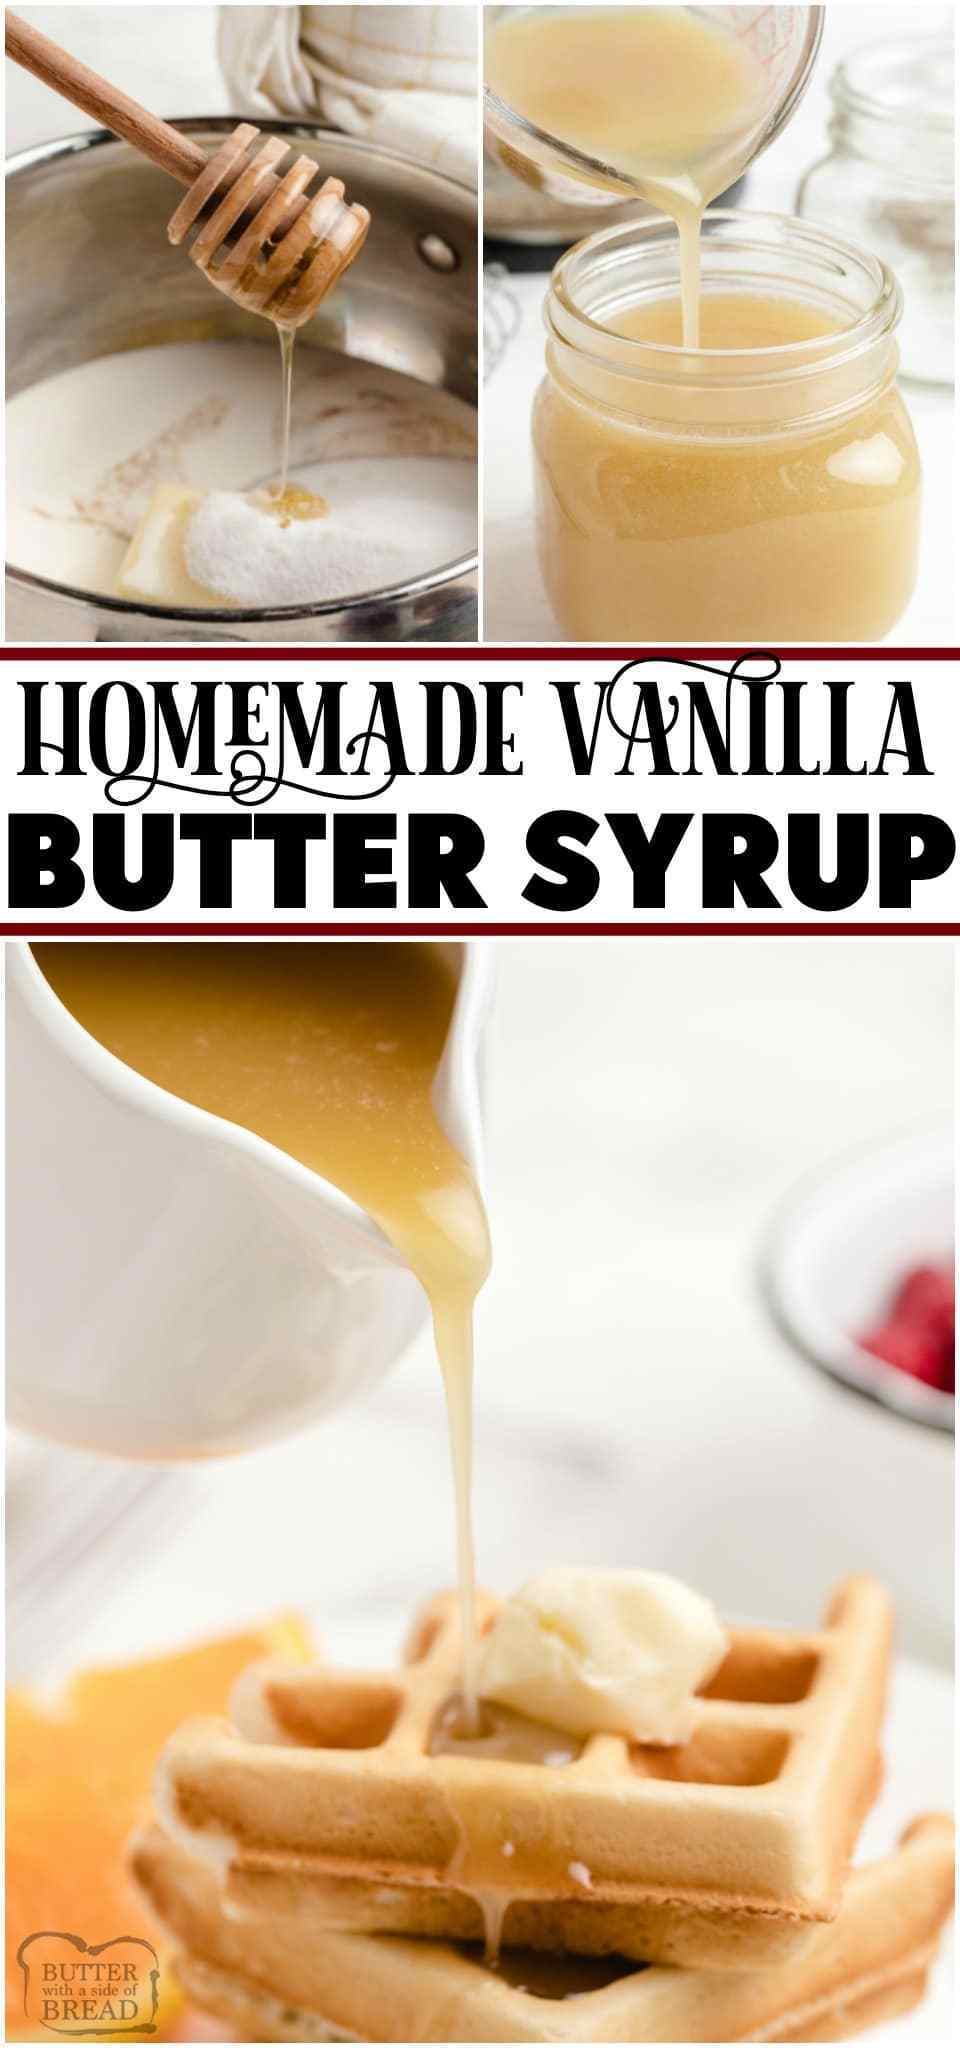 Vanilla Butter Syrup is better than anything store-bought! Homemade Syrup recipe made with butter, brown sugar, half & half, honey and vanilla extract. Easy to make syrup with fantastic buttery flavor!